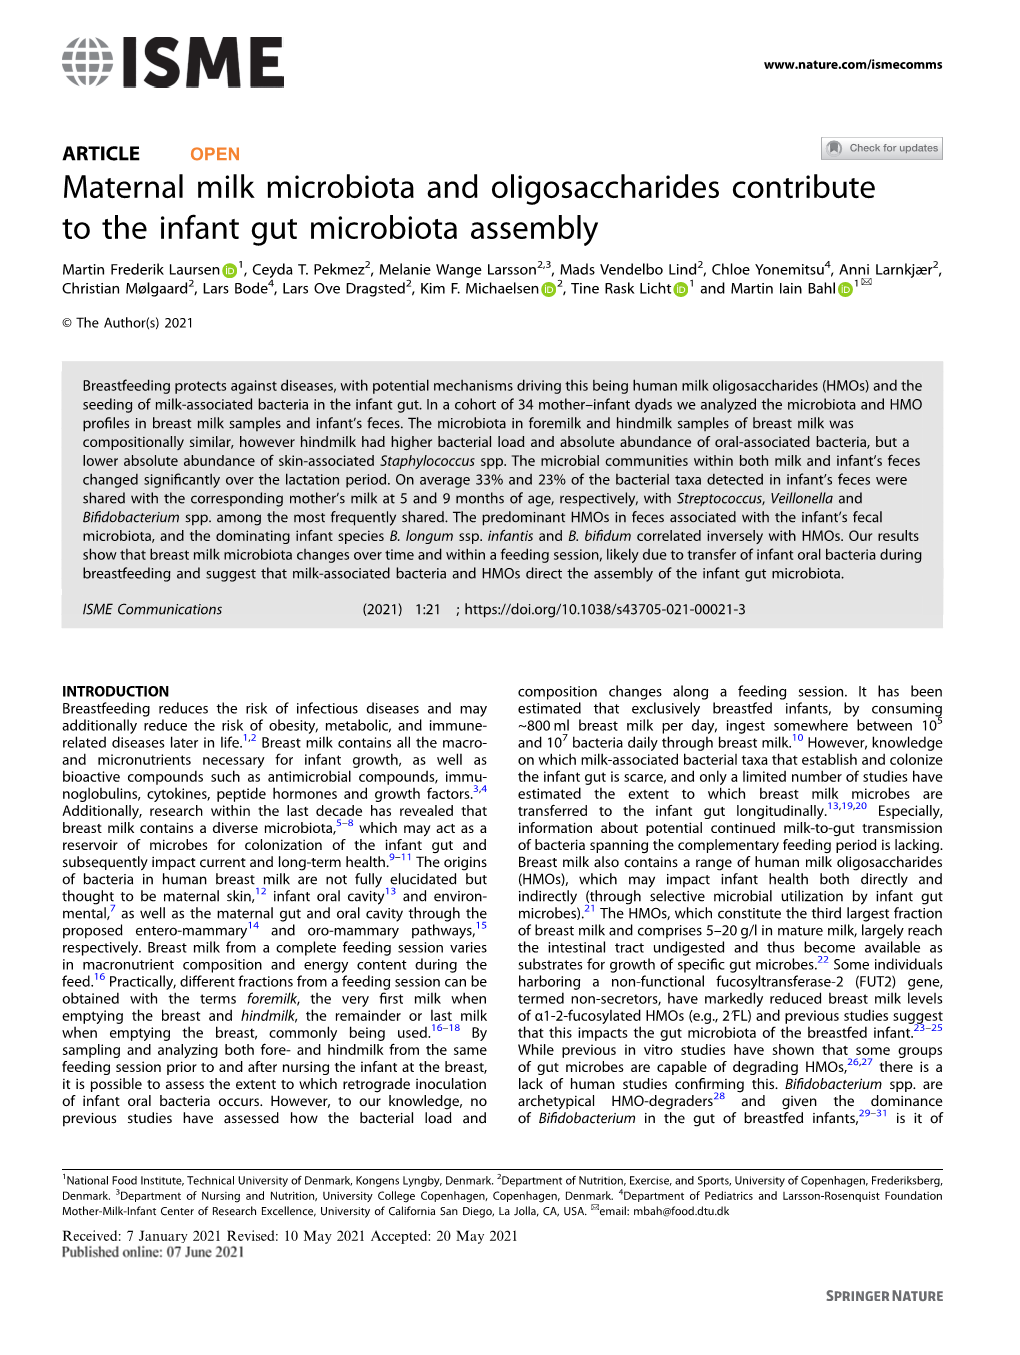 Maternal Milk Microbiota and Oligosaccharides Contribute to the Infant Gut Microbiota Assembly